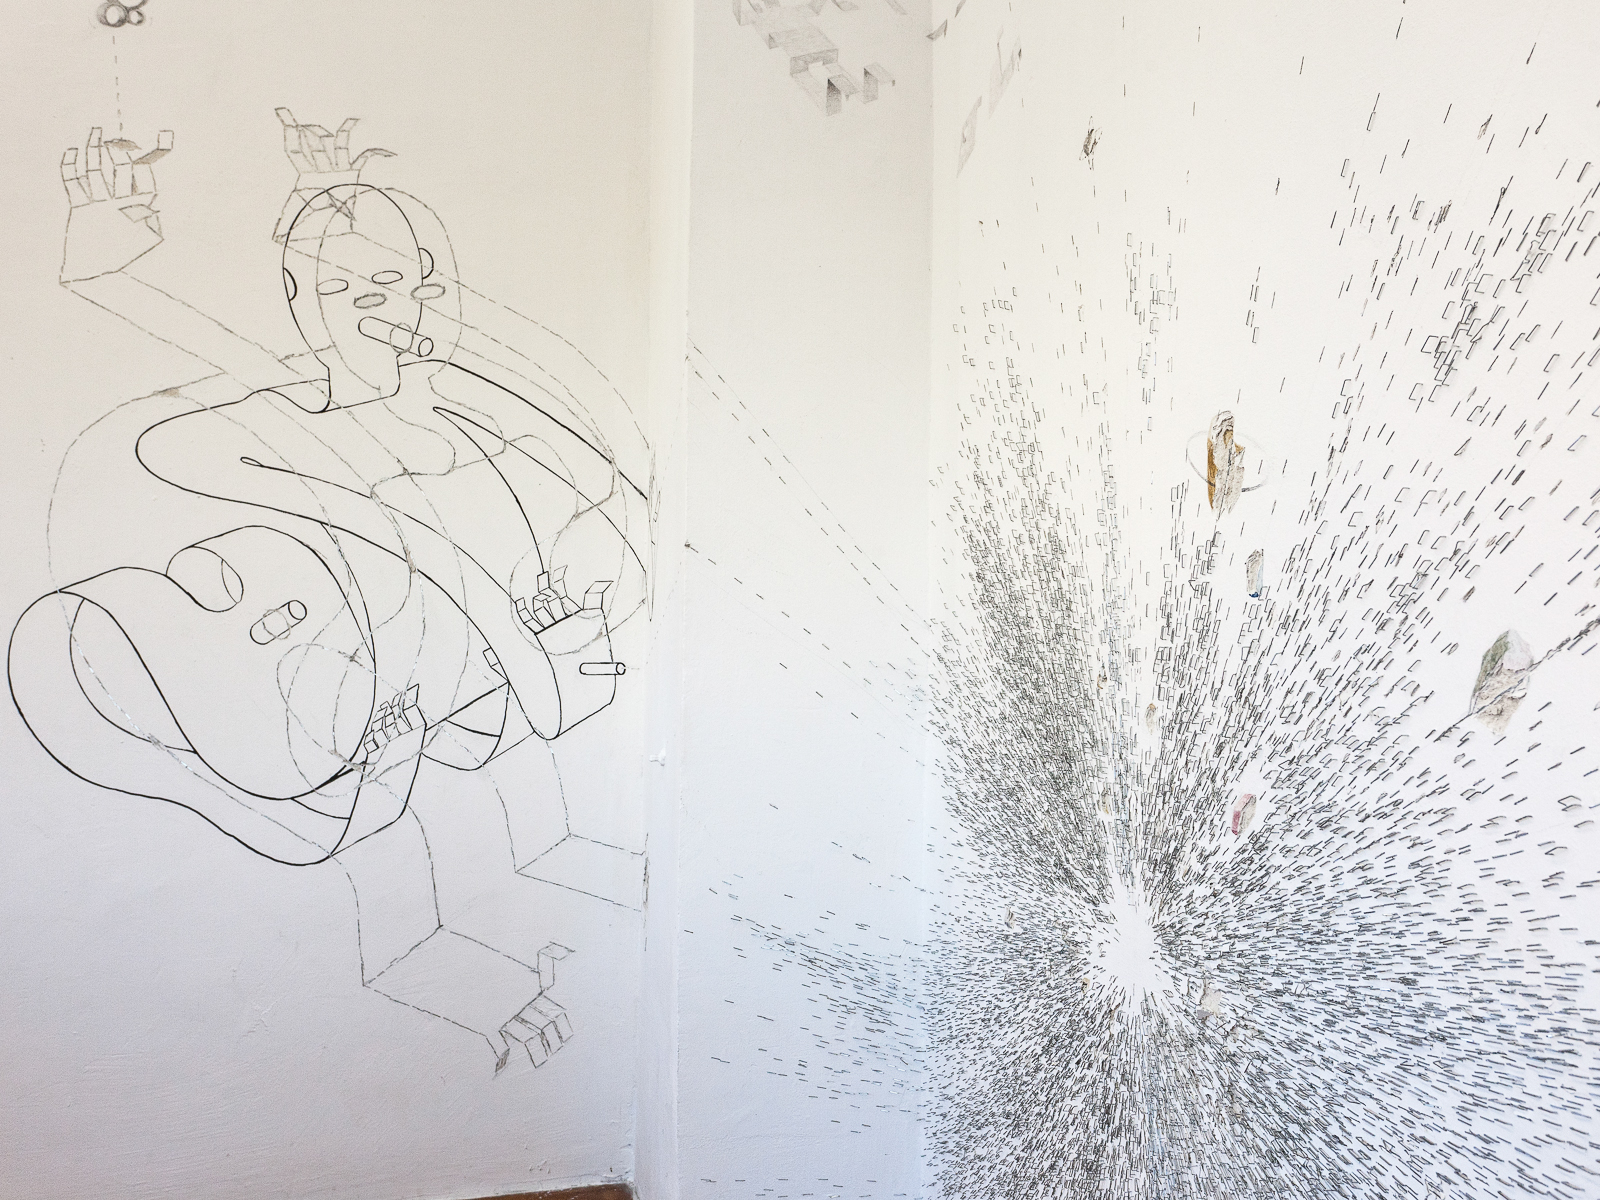 »Neuronales Gewitter« | Left part of the wall drawing